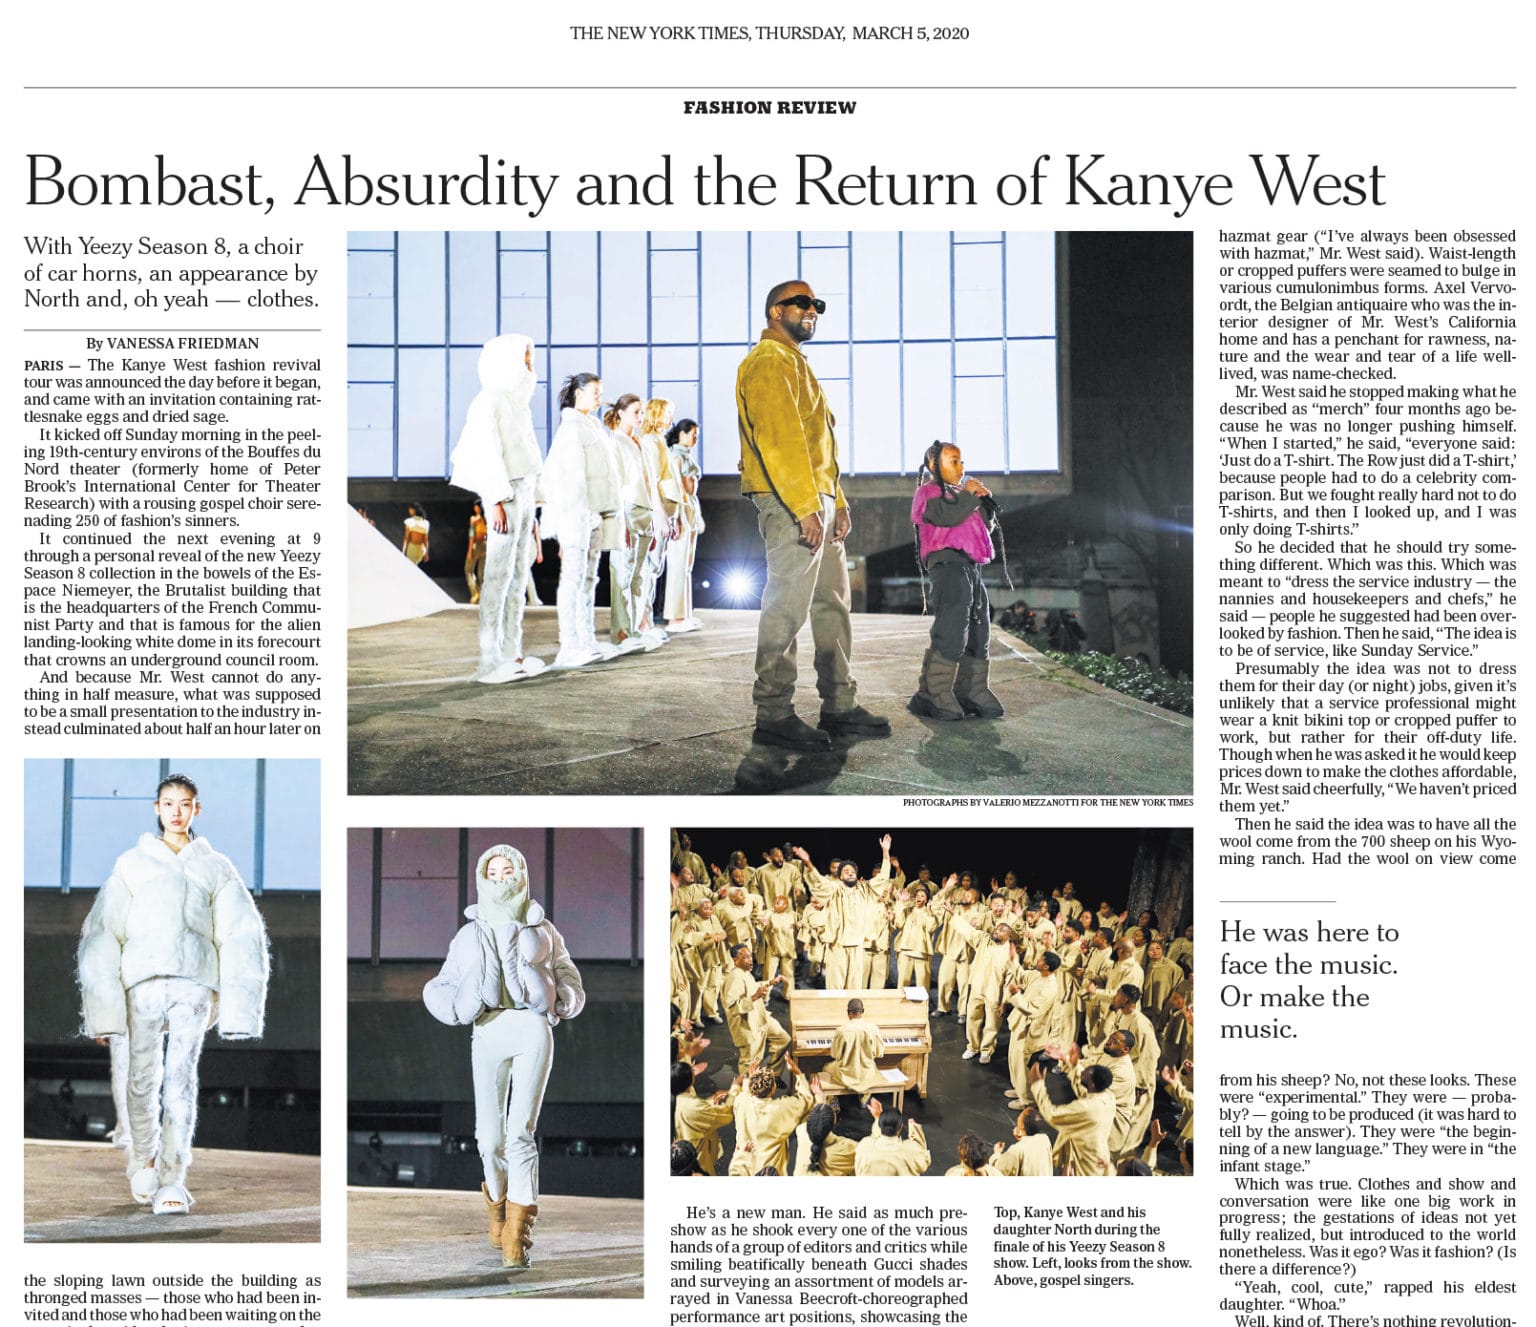 Kanye West and North West at the Yeezy Fashion Show, Photo by Valerio Mezzanotti for The New York Times